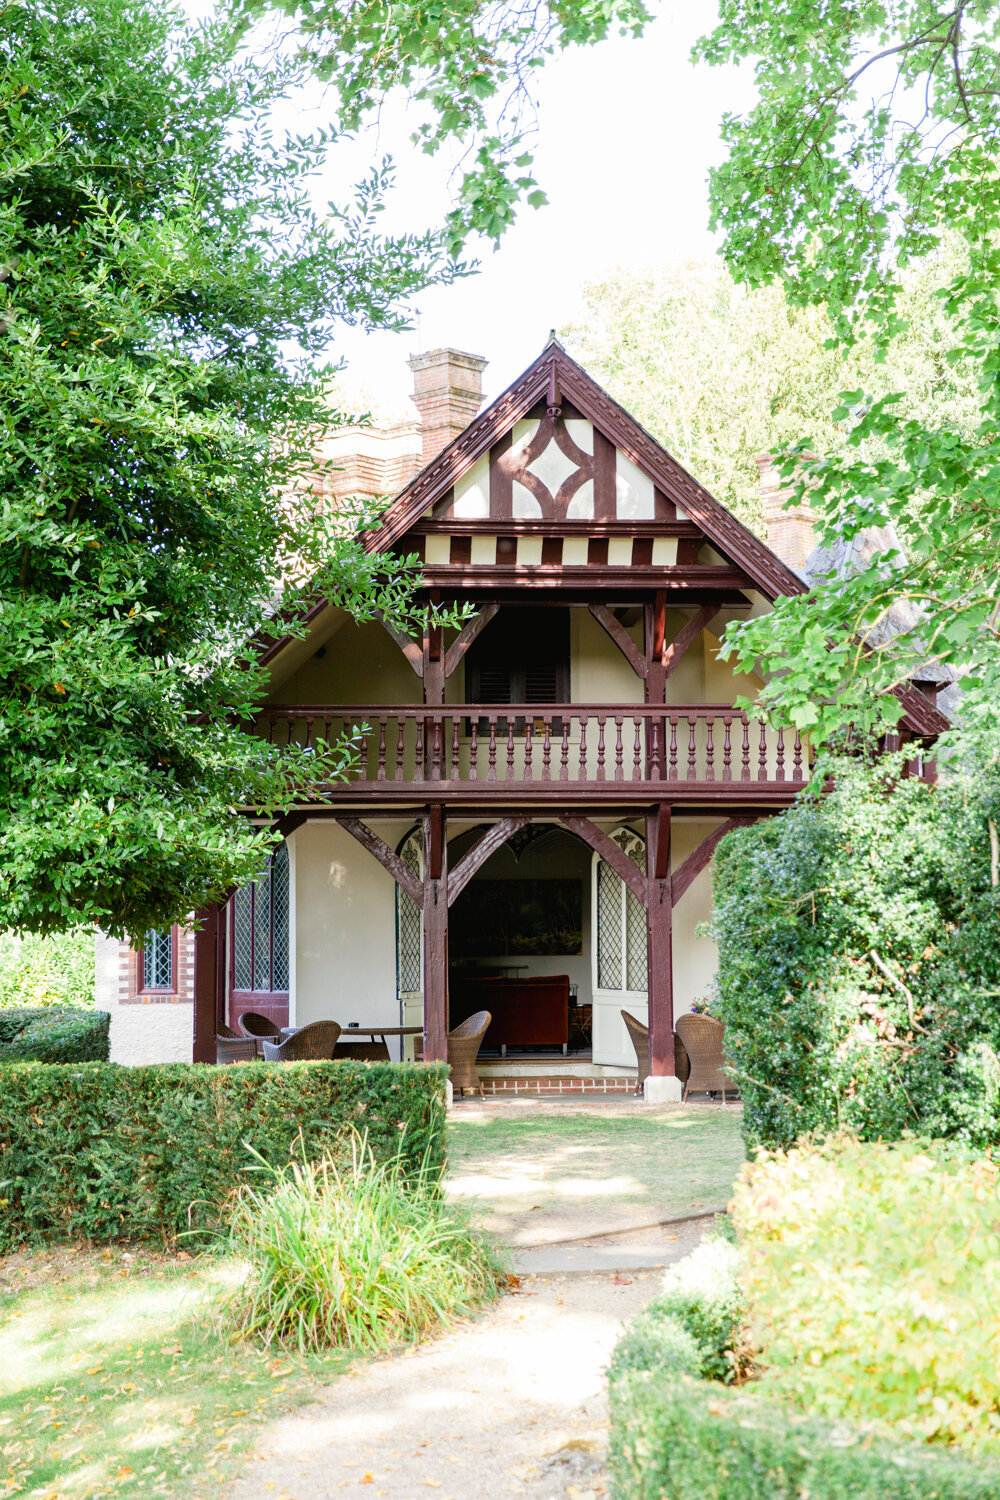 Summer Cottage at Cliveden House with a brown wrap porch